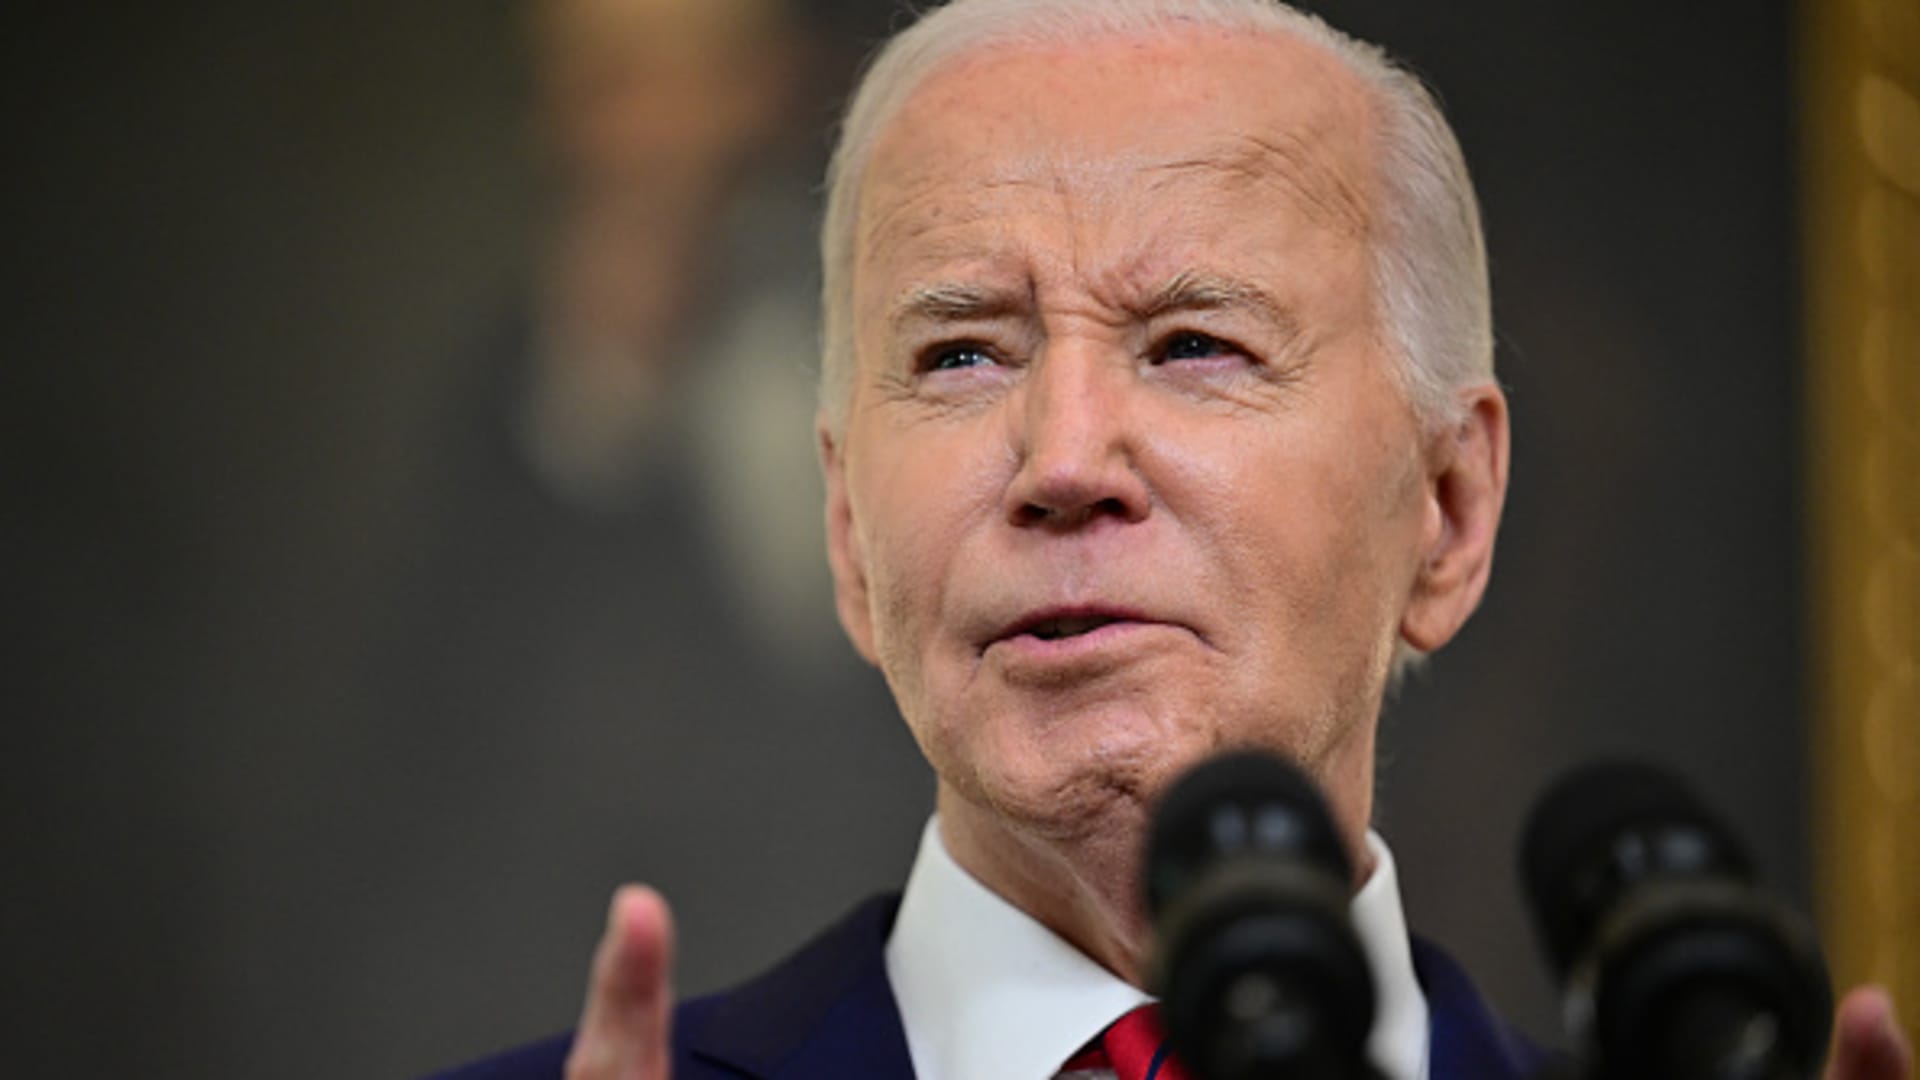 US Aids Ukraine, Israel, and Taiwan: Biden Signs Bill to Provide $60B for Ukraine, Ban TikTok or Force Sale